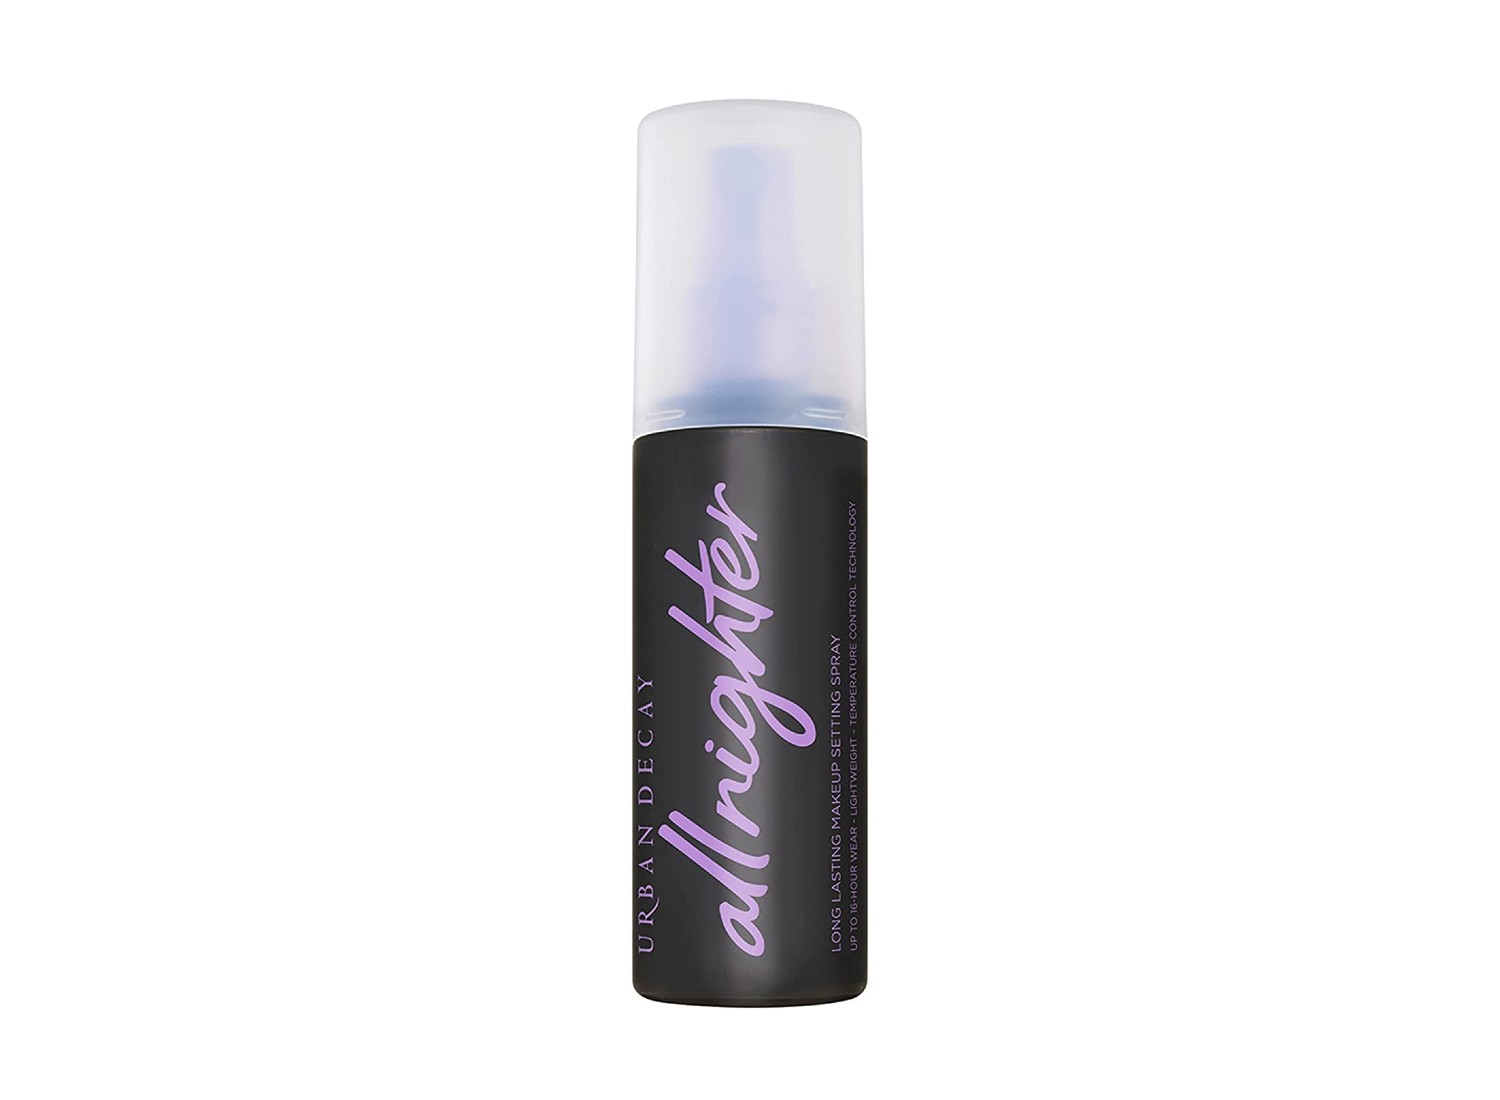 An Urban Decay Setting Spray bottle on a white background